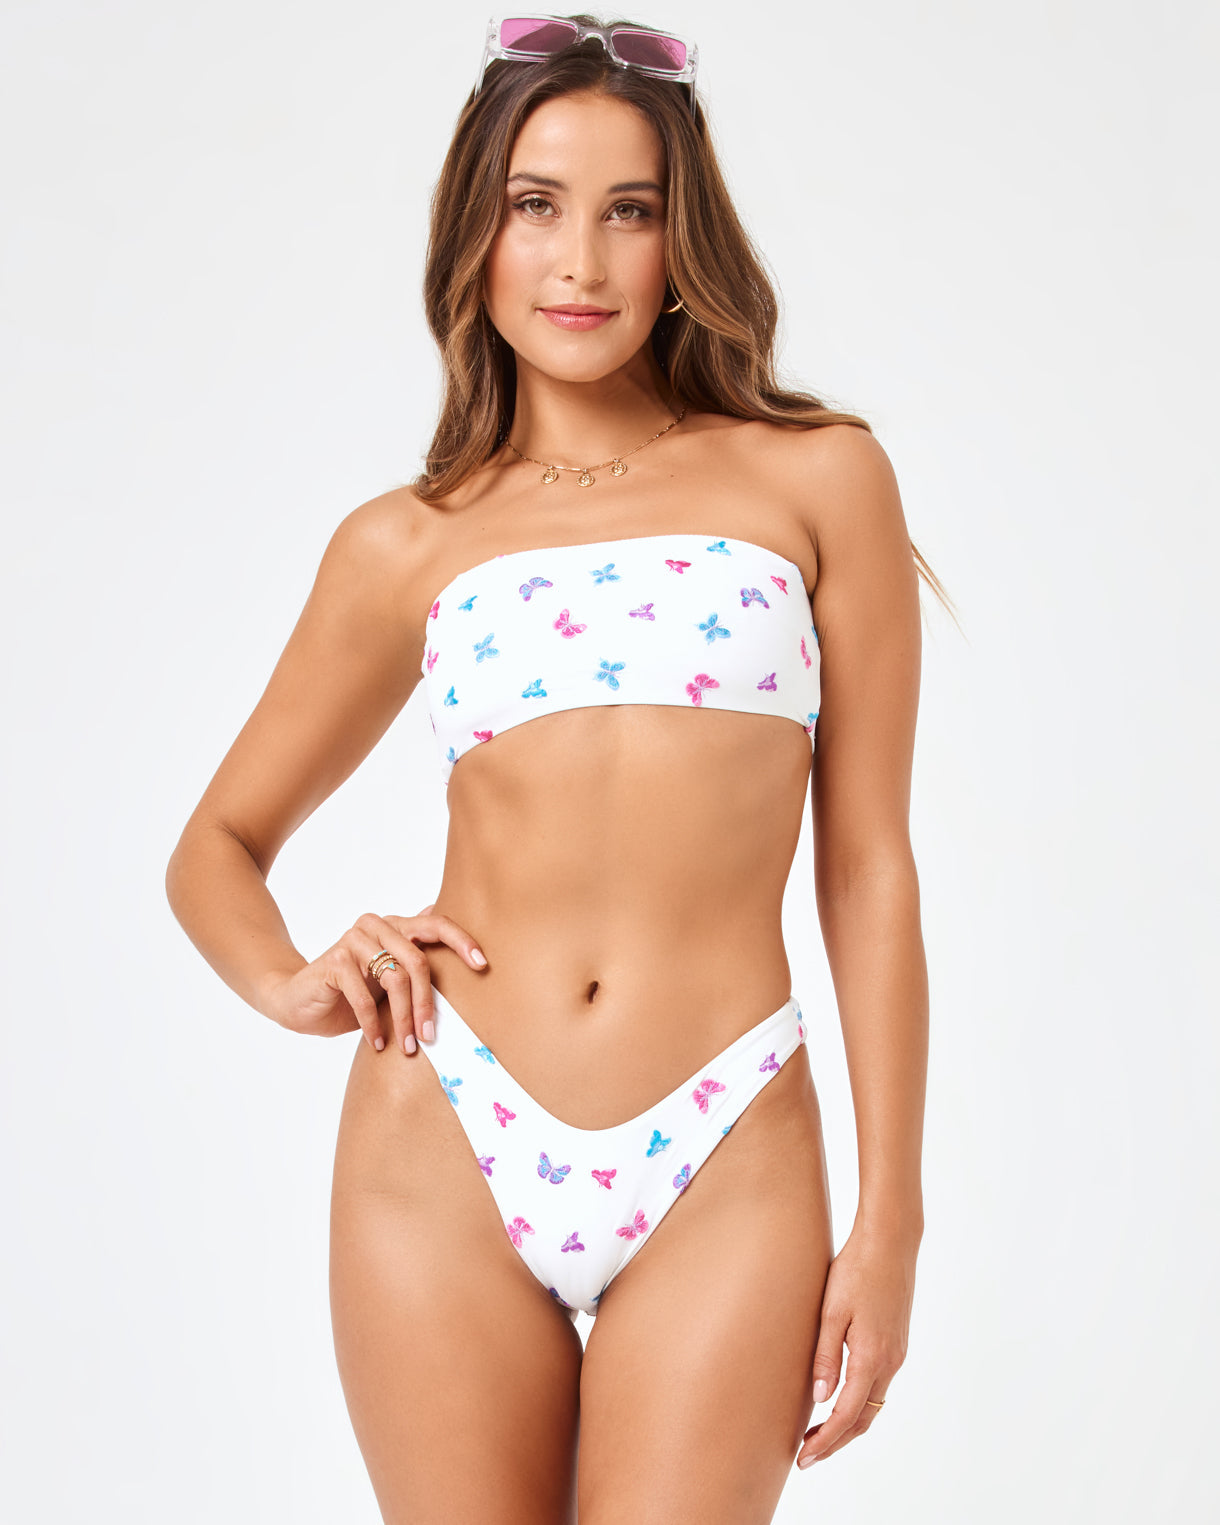 Butterfly Embroidery Lucy Bikini Top White | Model: Anna (size: S)